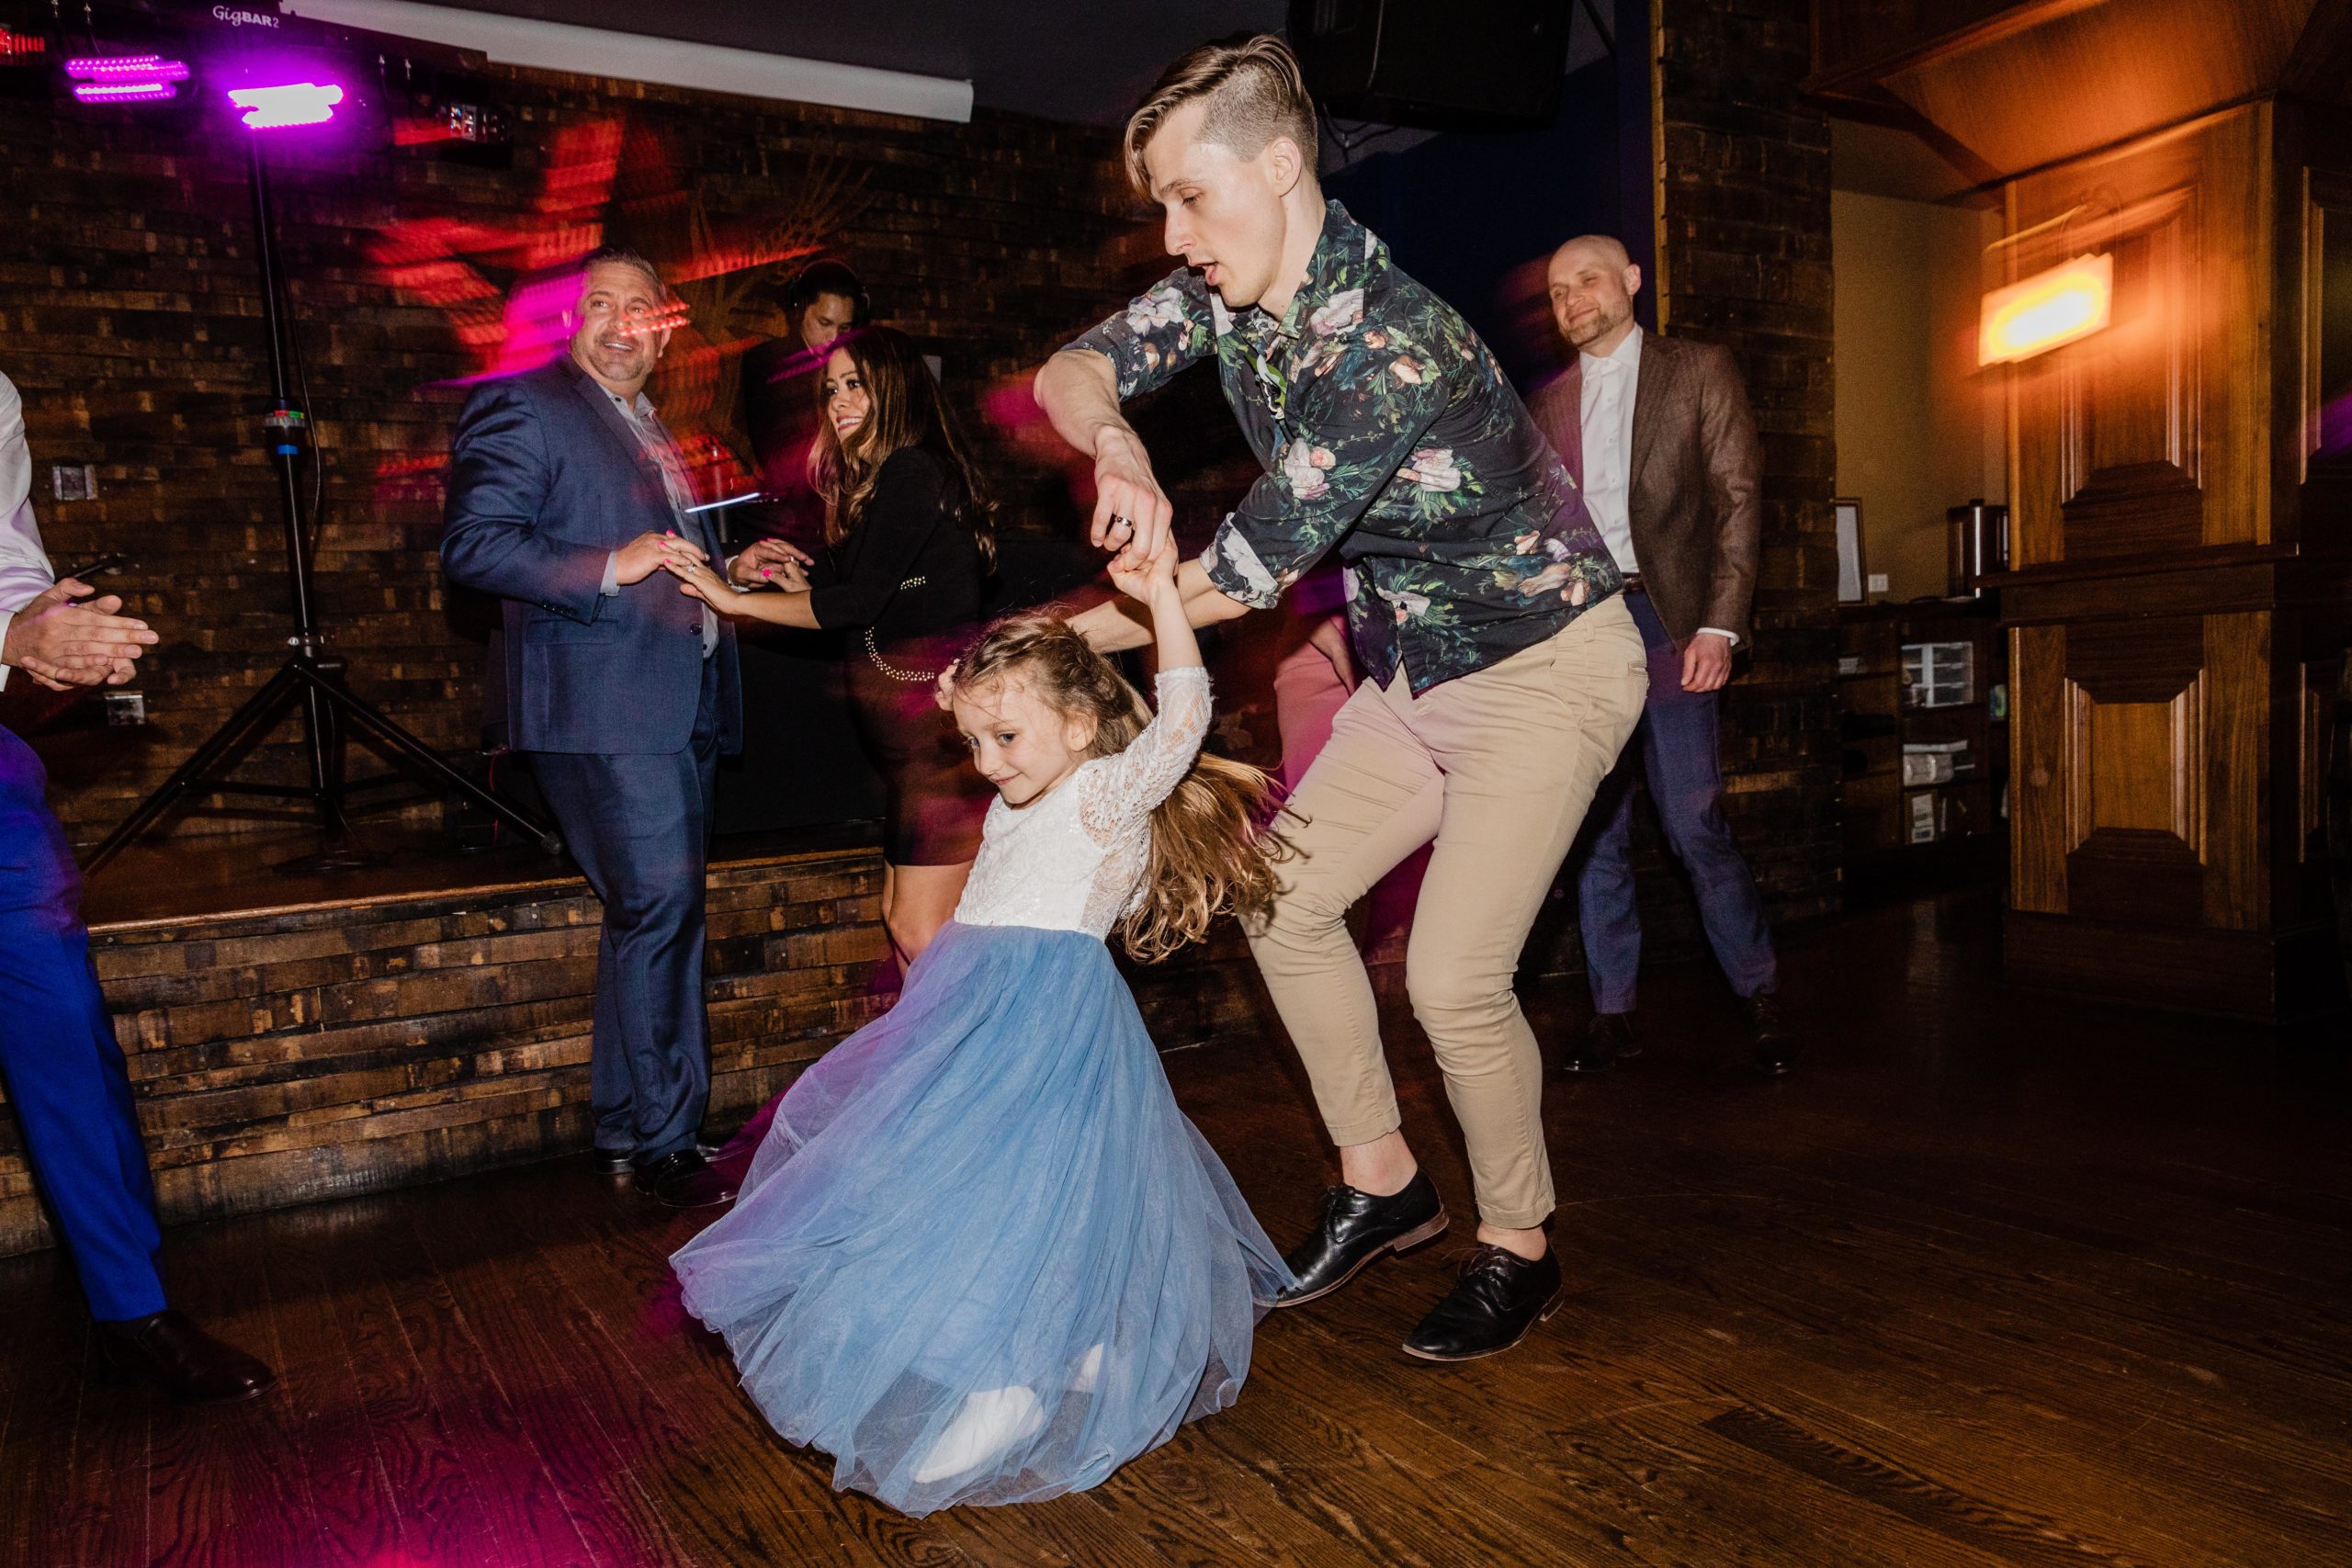 Bride's niece being spun on the dance floor at a Revolution Brewing Wedding